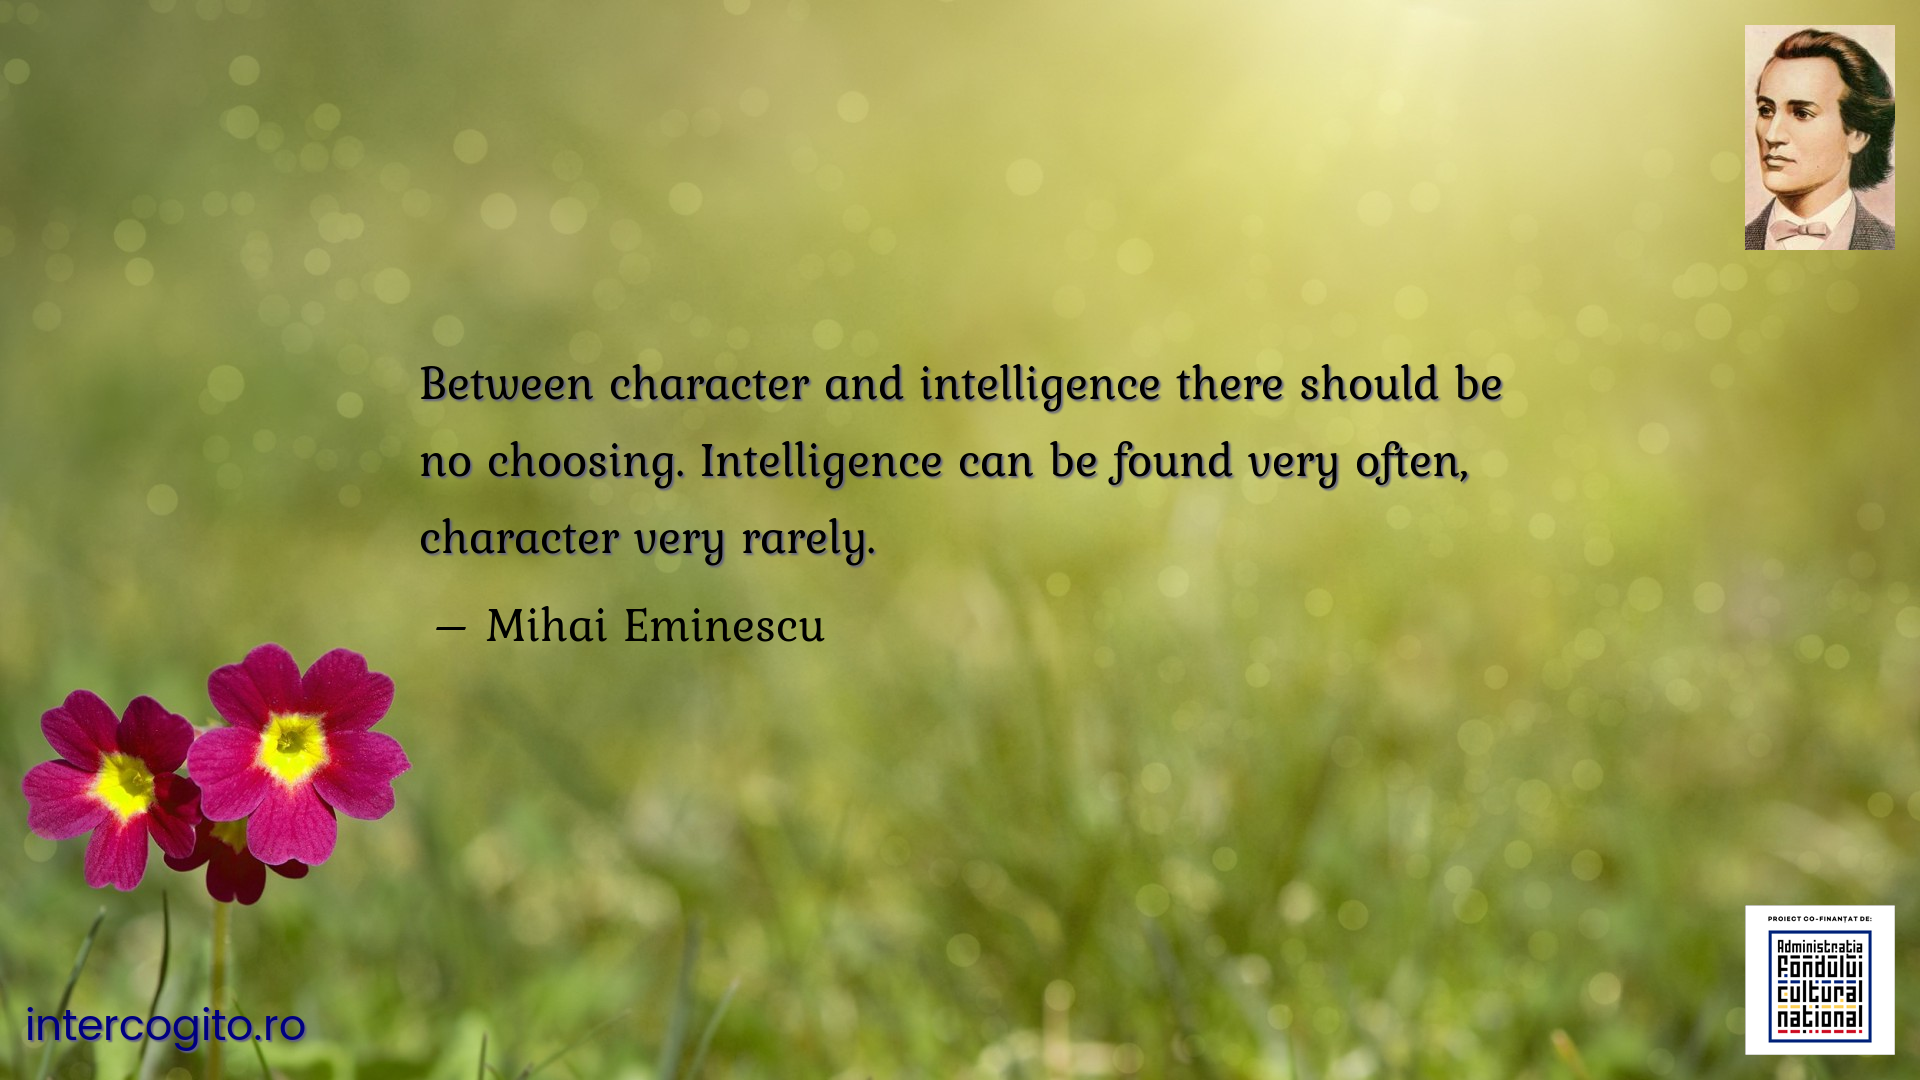 Between character and intelligence there should be no choosing. Intelligence can be found very often, character very rarely.